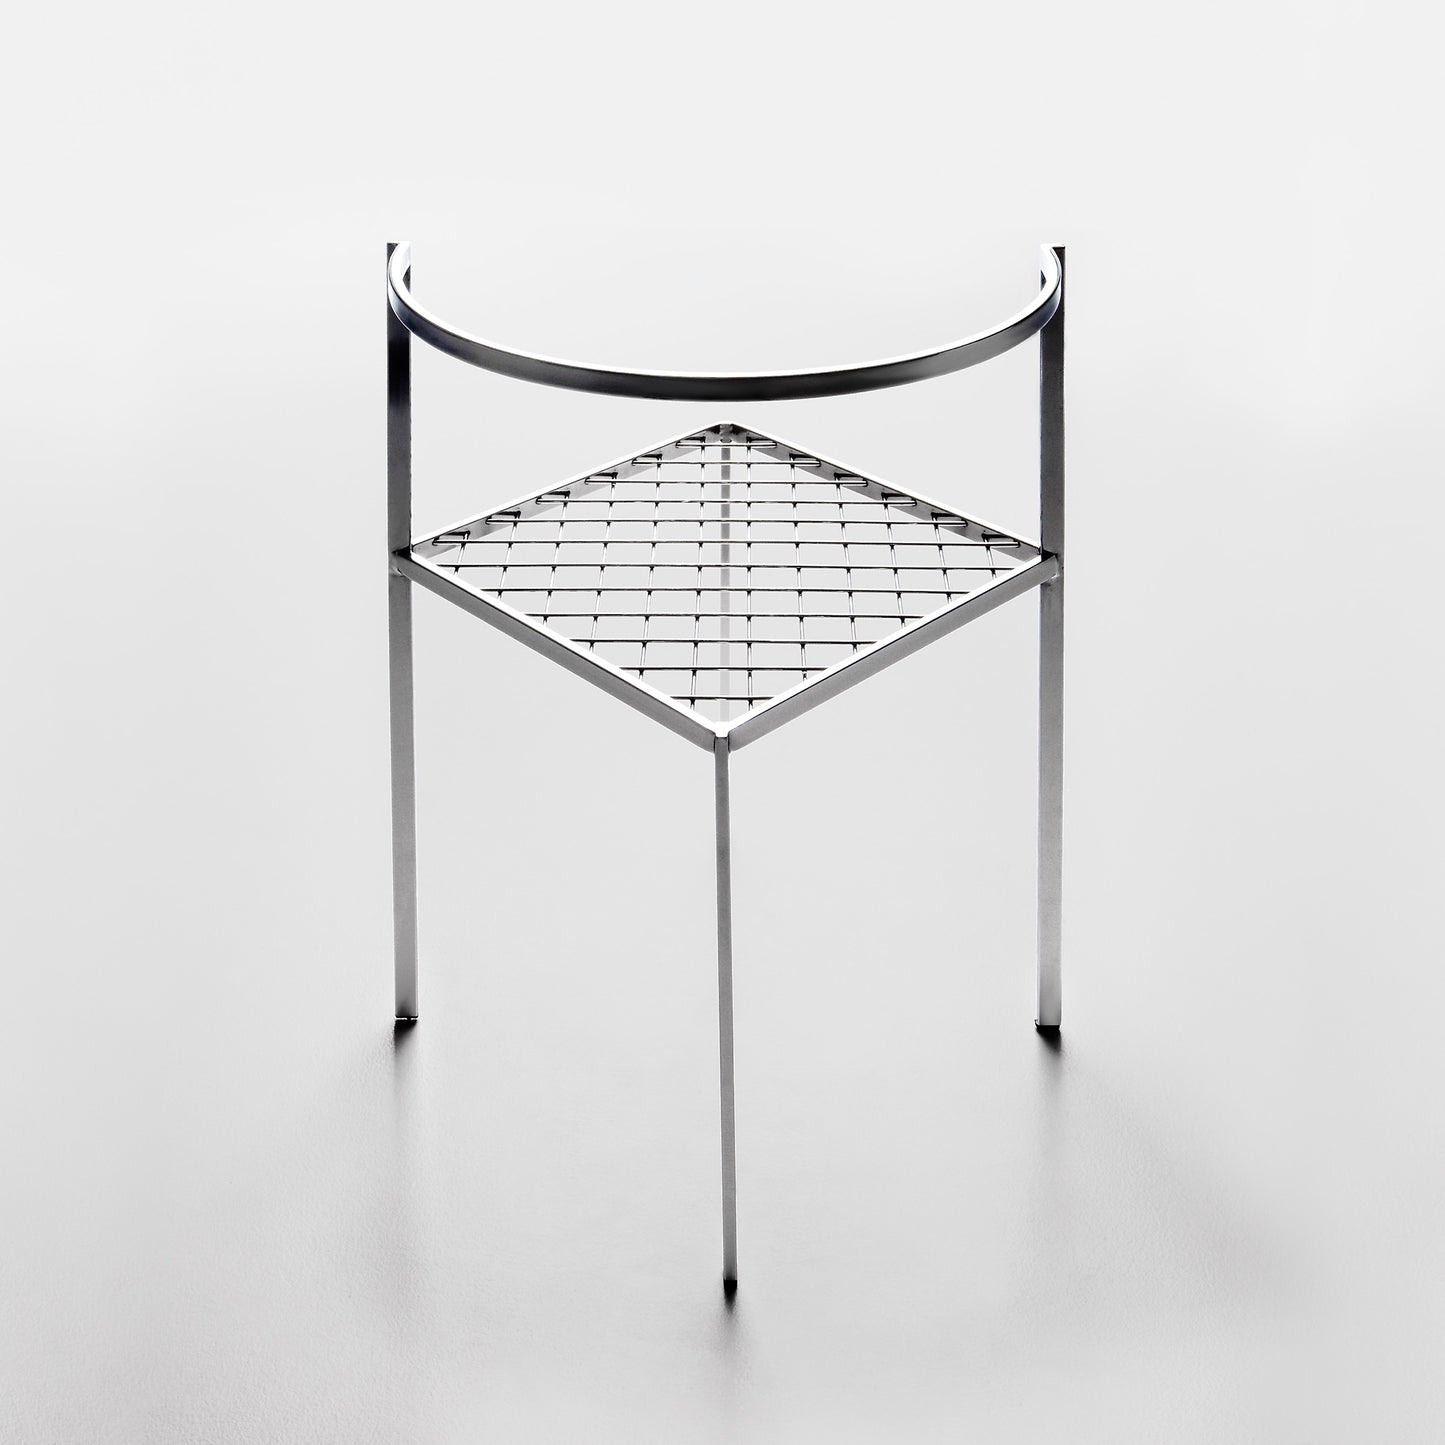 SQUARE THE CIRCLE Chair